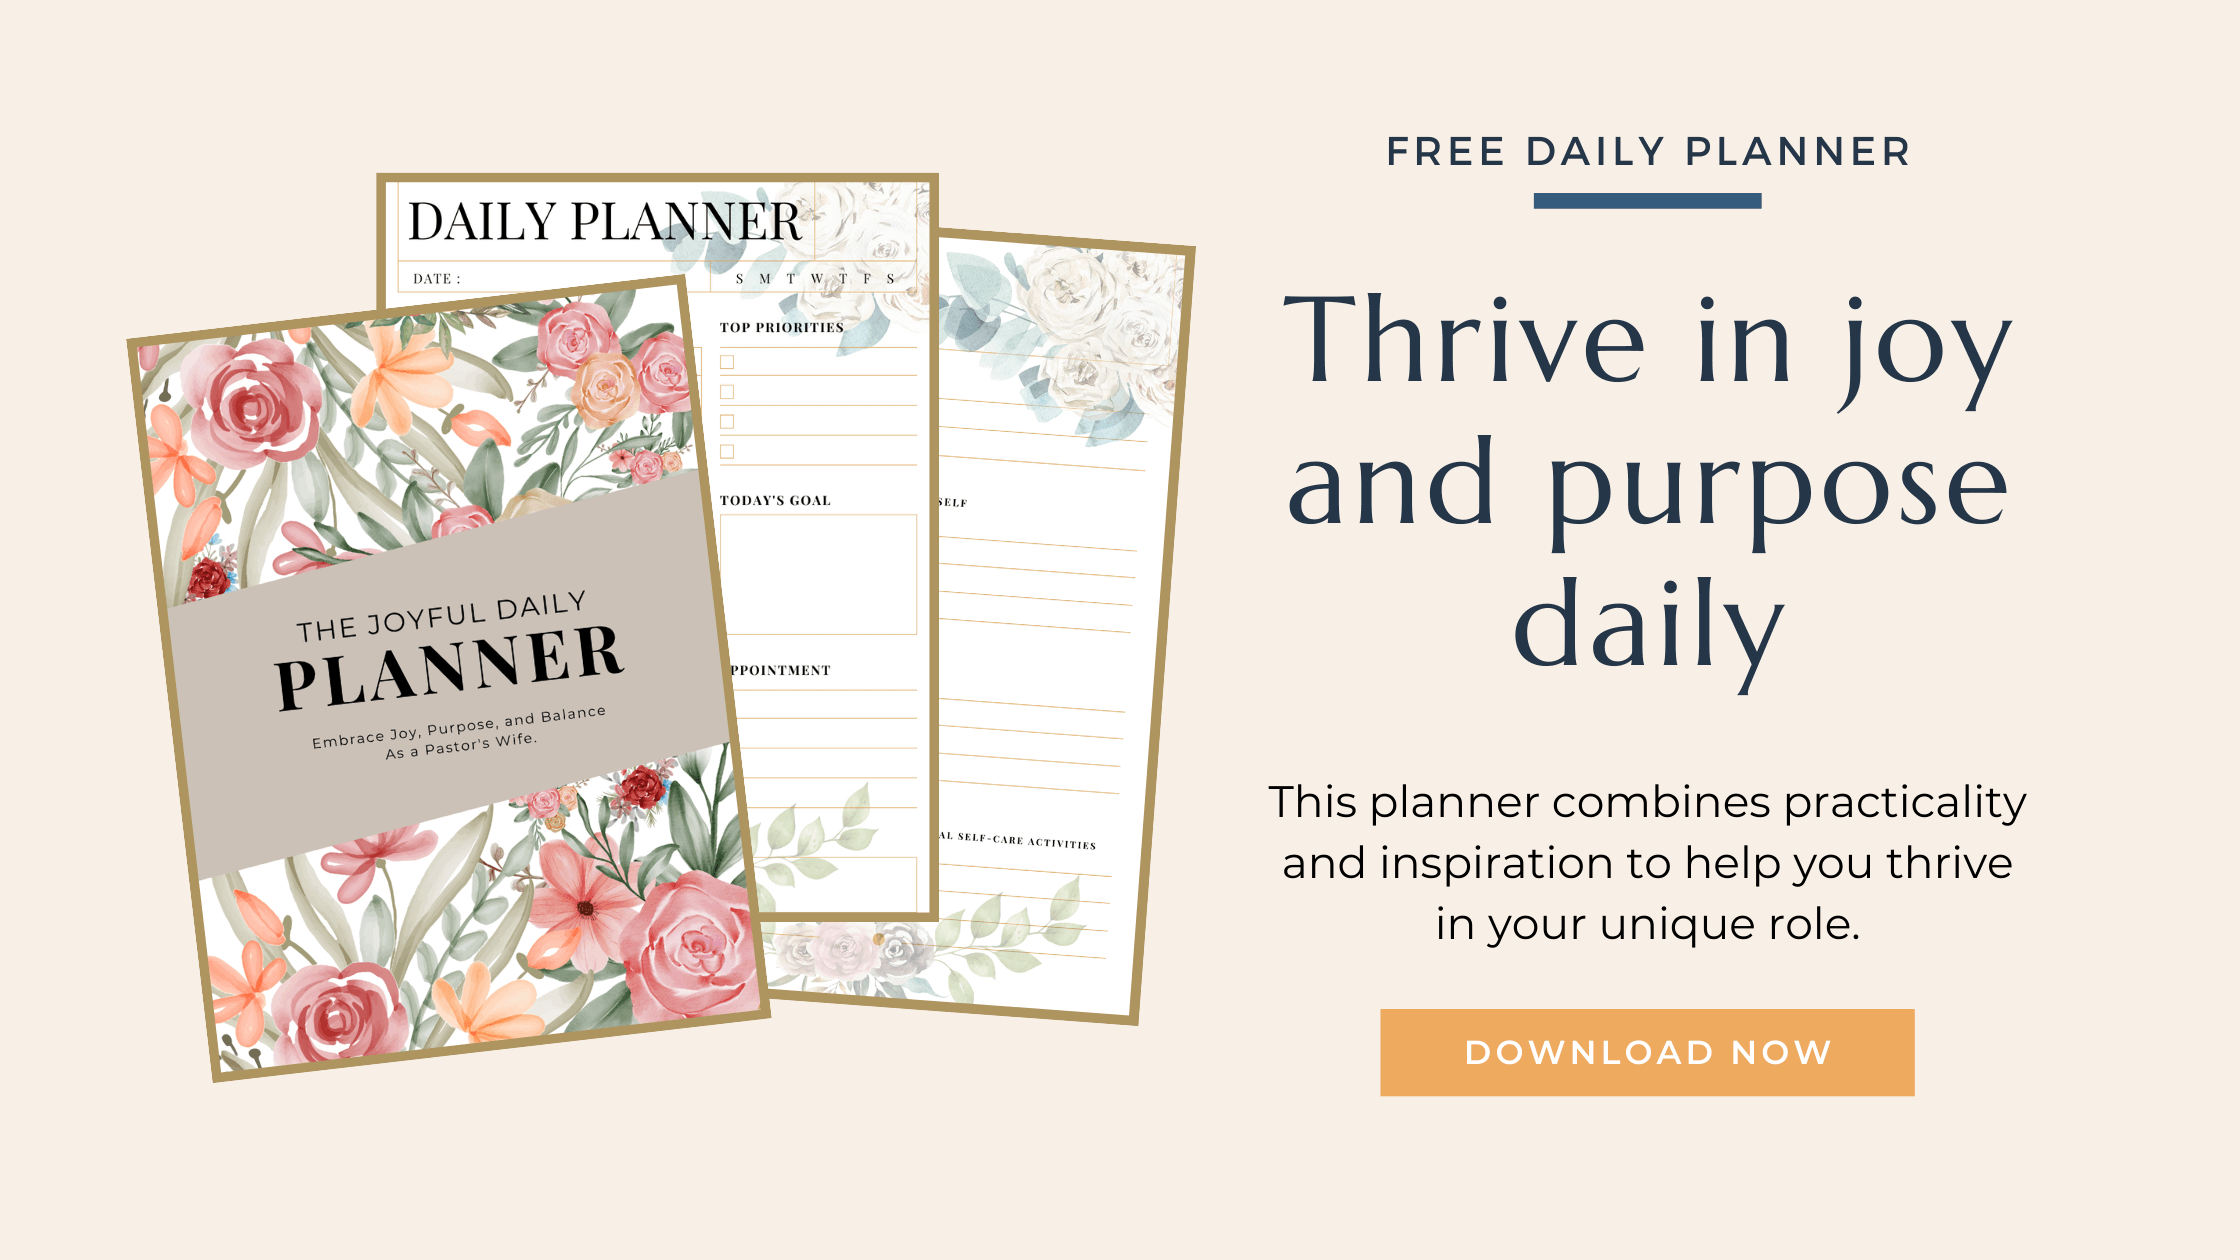 She Is A Message Joyful Daily Planner For Pastors Wives For the Blog post 20 ways to encourage your pastor's wife today